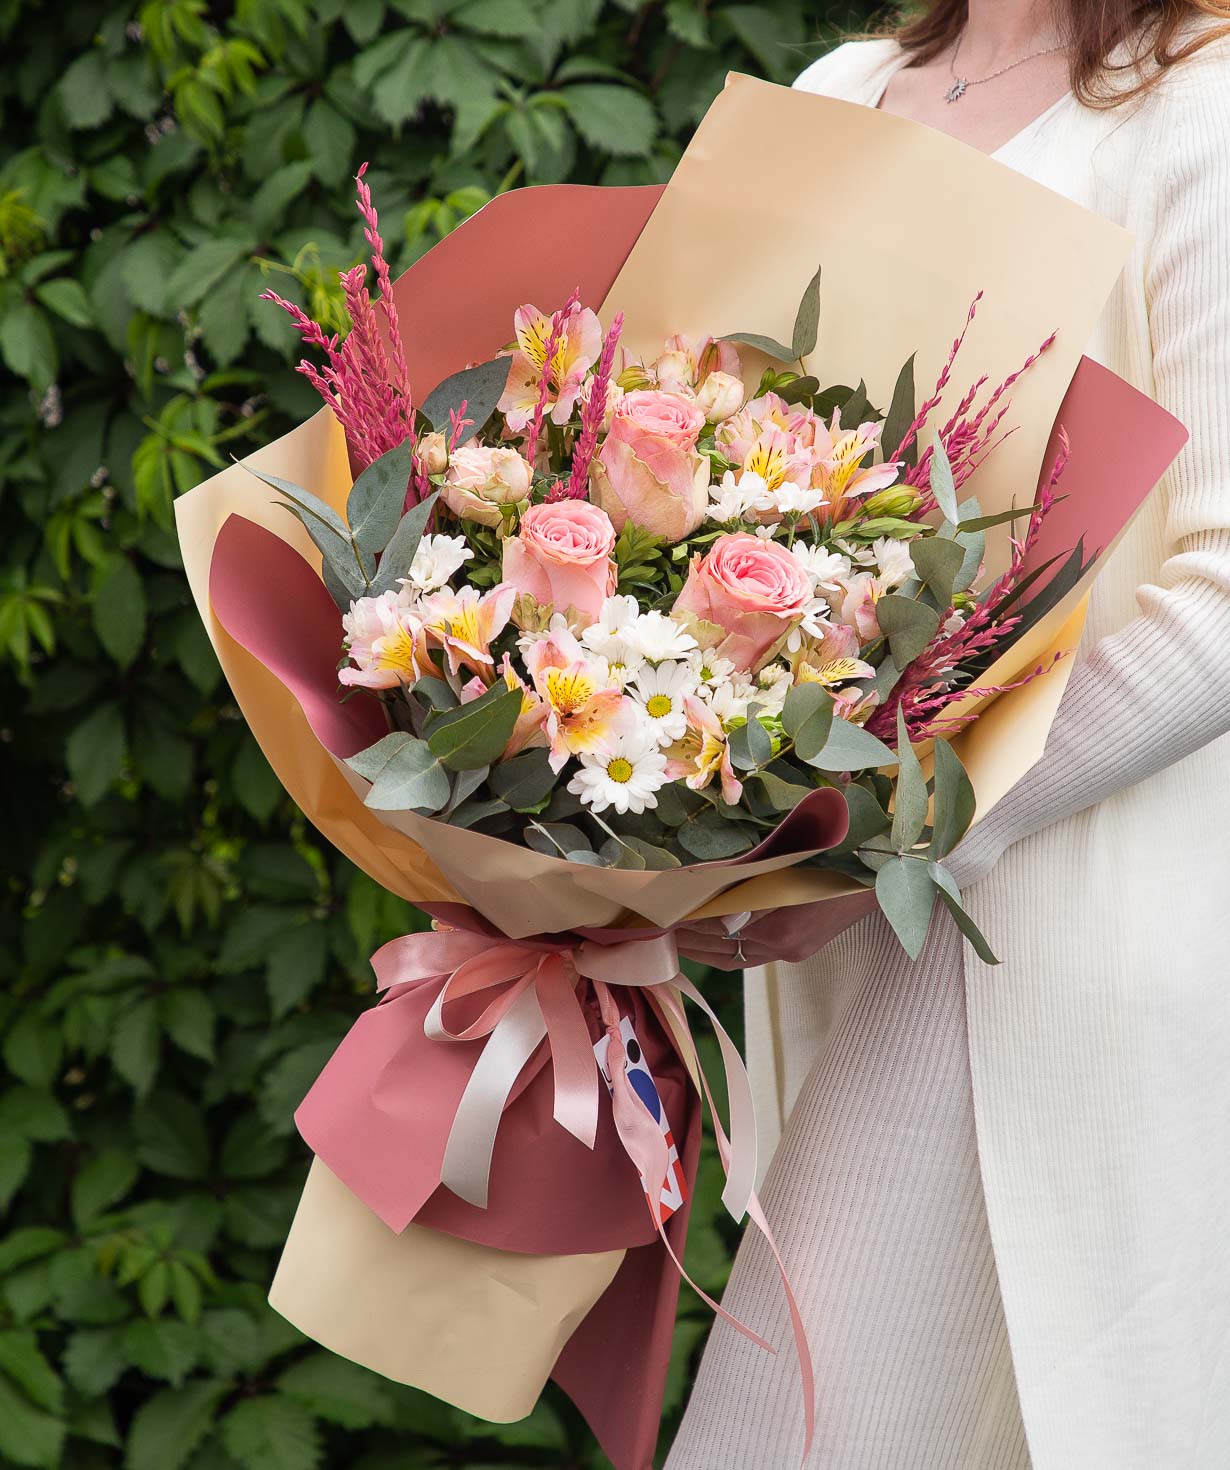 Bouquet «Fairbanks» with roses and chrysanthemums